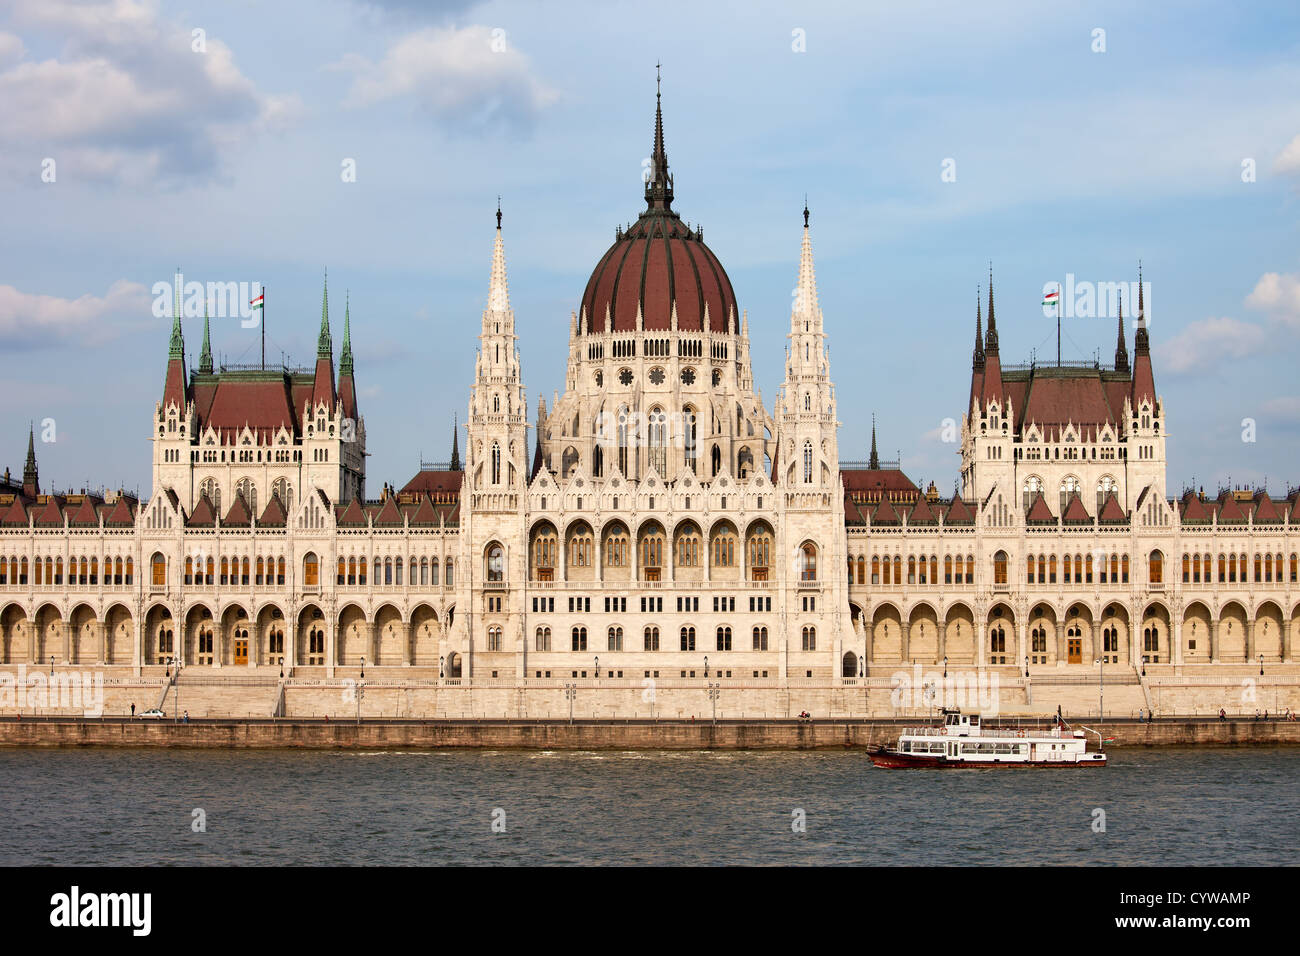 Hungarian Parliament Building Gothic Revival architecture by the Danube river in Budapest, Hungary. Stock Photo